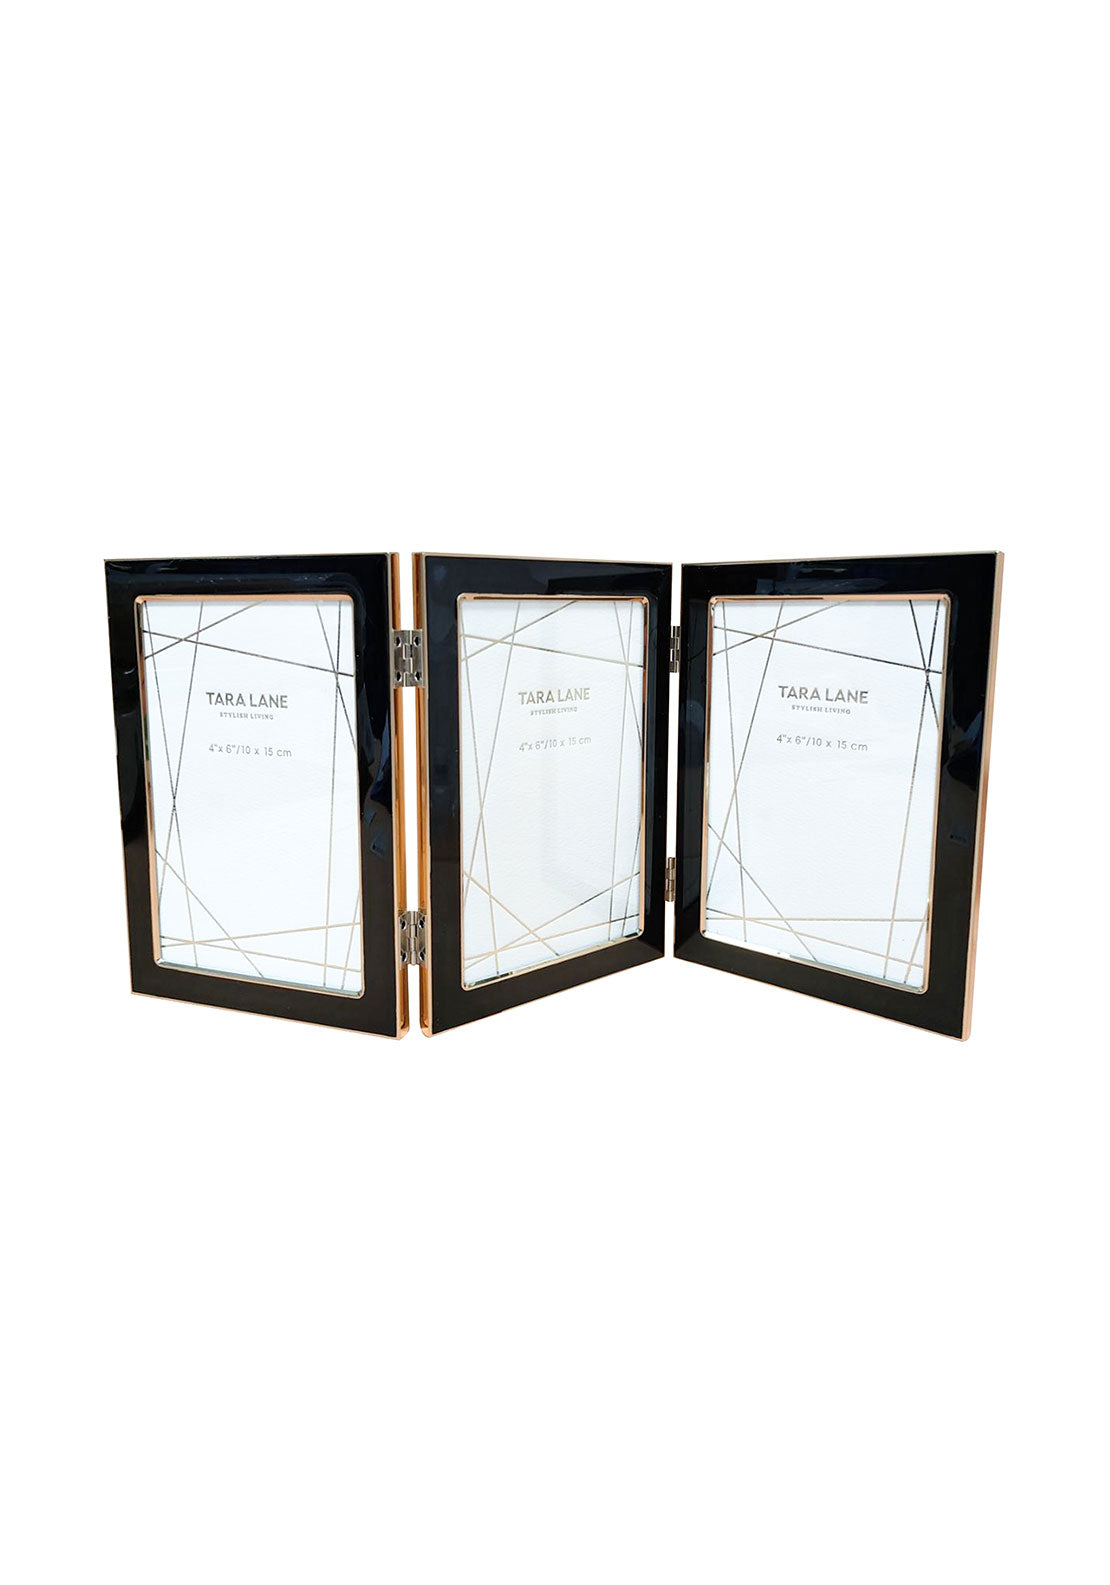 The Home Collection Ella Folding Photo Frame 4X6 1 Shaws Department Stores